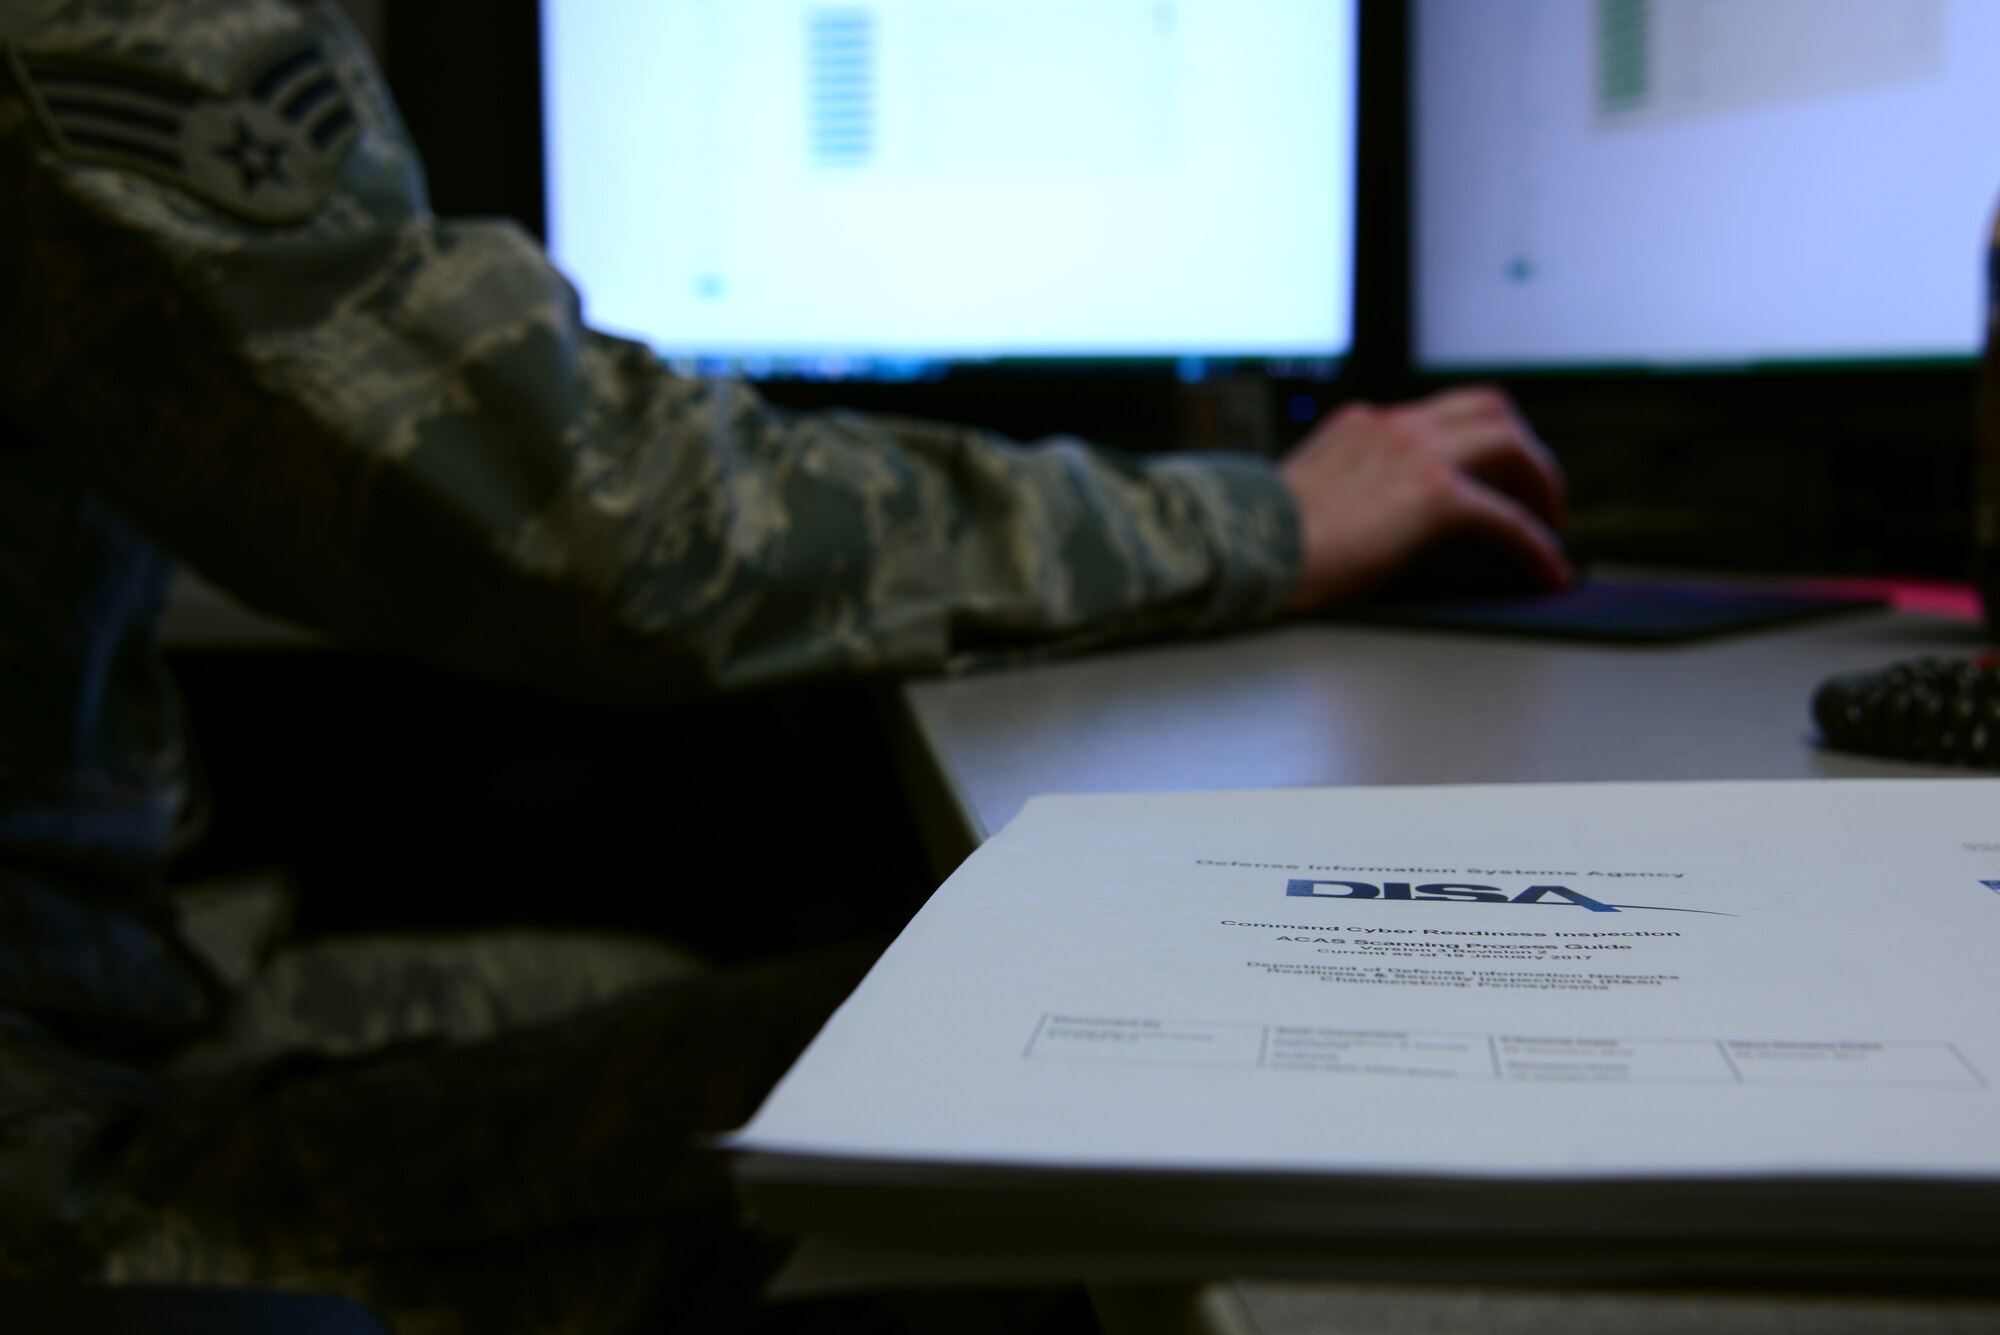 An assured compliance assessment solution guide lies on a desk in a 20th Communications Squadron office at Shaw Air Force Base, S.C., March 15, 2017. The guide, produced by the Defense Information Systems Agency, gives users information about how the program can be used to scan computer networks for vulnerabilities. (U.S. Air Force photo by Airman 1st Class Kathryn R.C. Reaves)